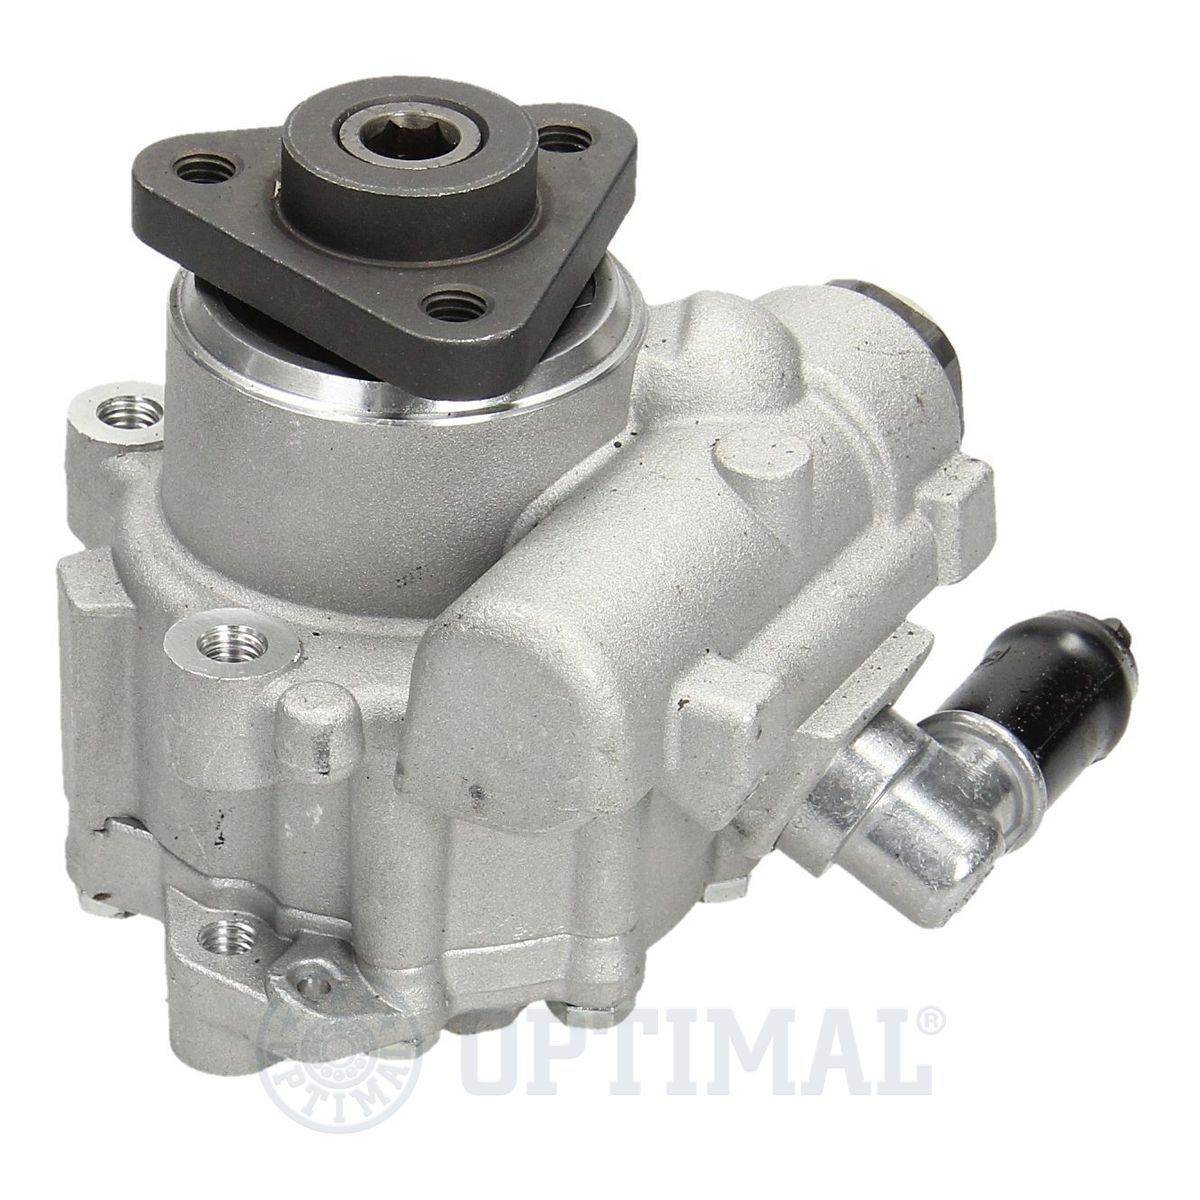 OPTIMAL Hydraulic steering pump HP-975 for AUDI A4, A6